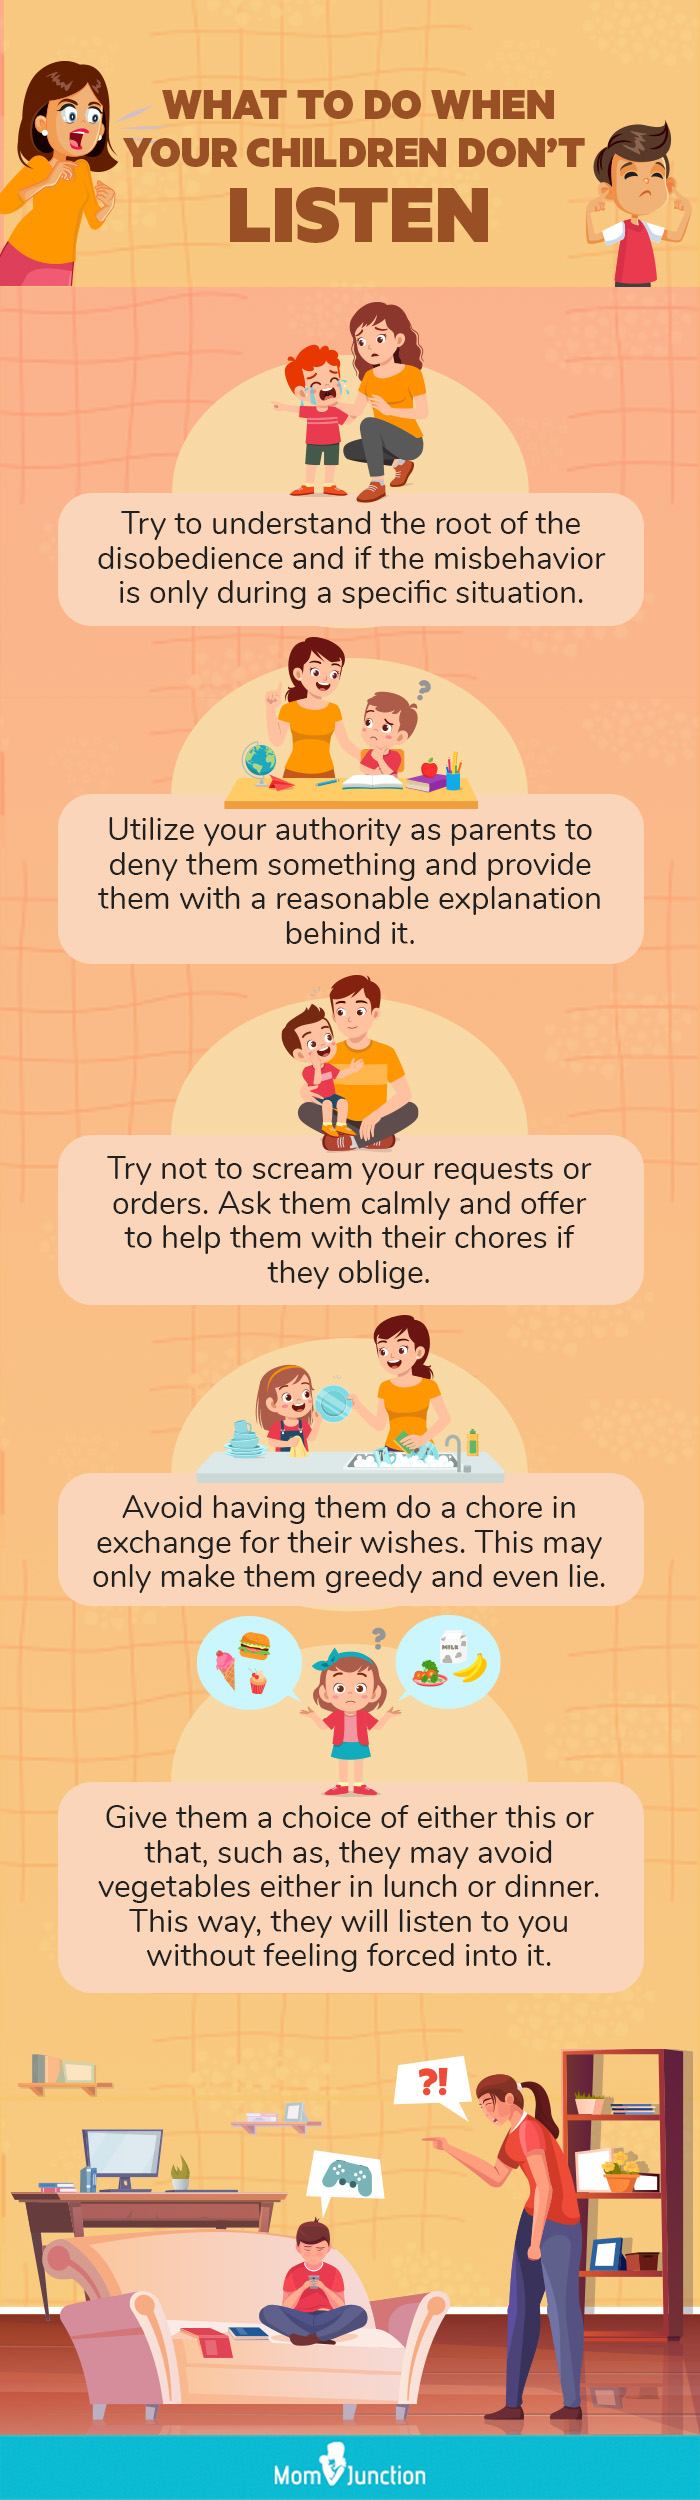 tips to discipline a disobedient child [infographic]